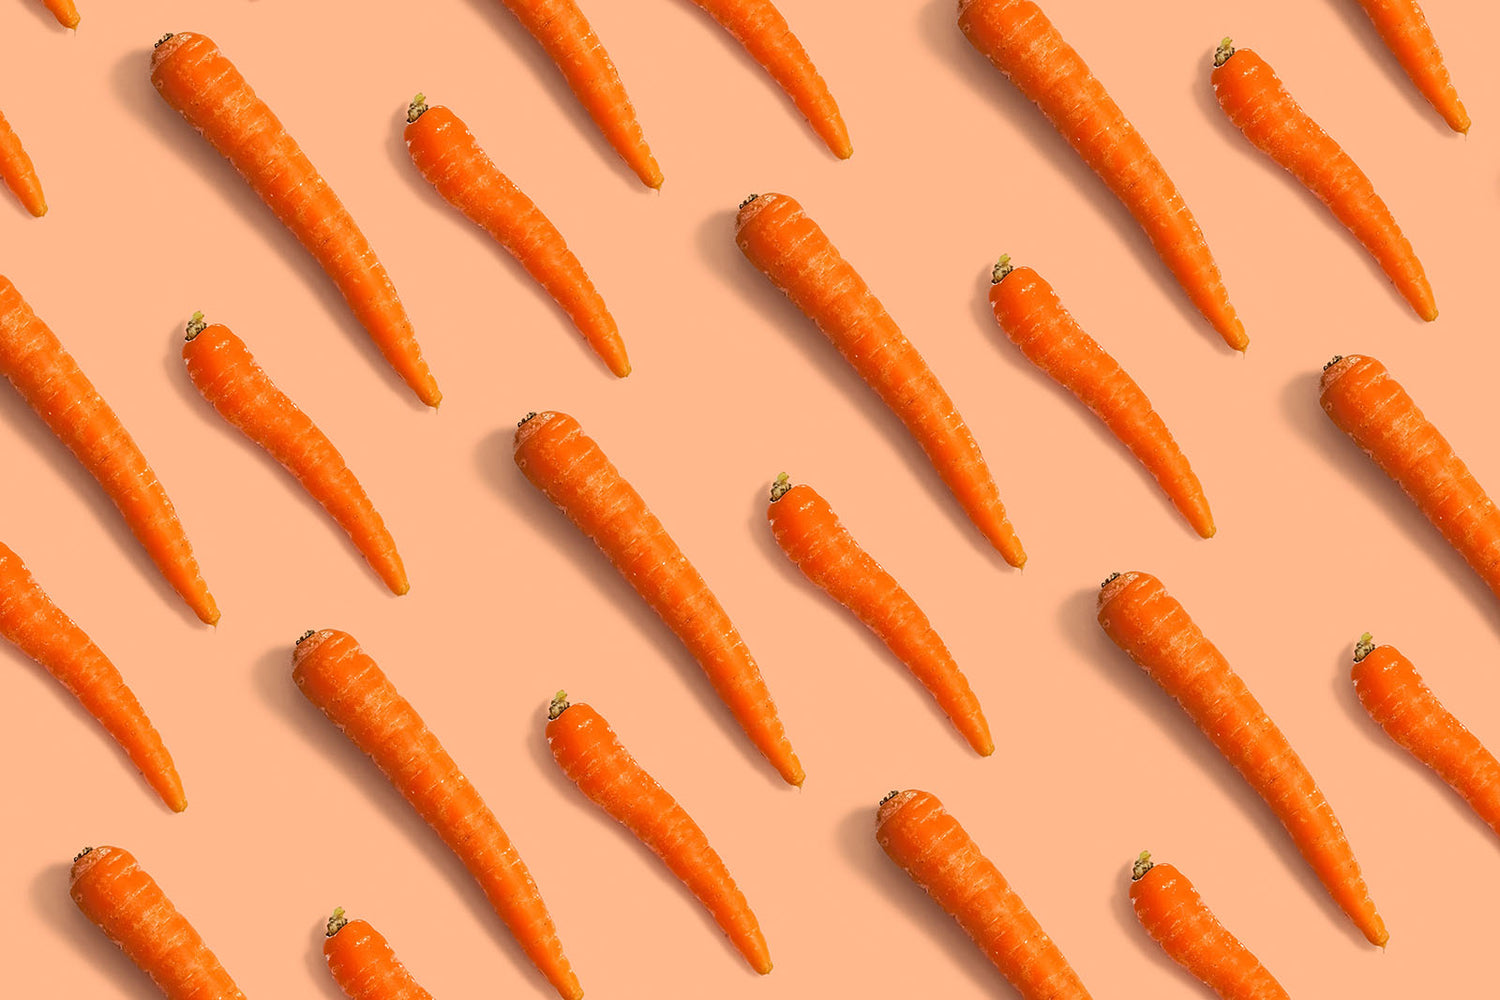 Bright, fun image from above of orange carrots laid out in diagonal pattern on a light orange background 